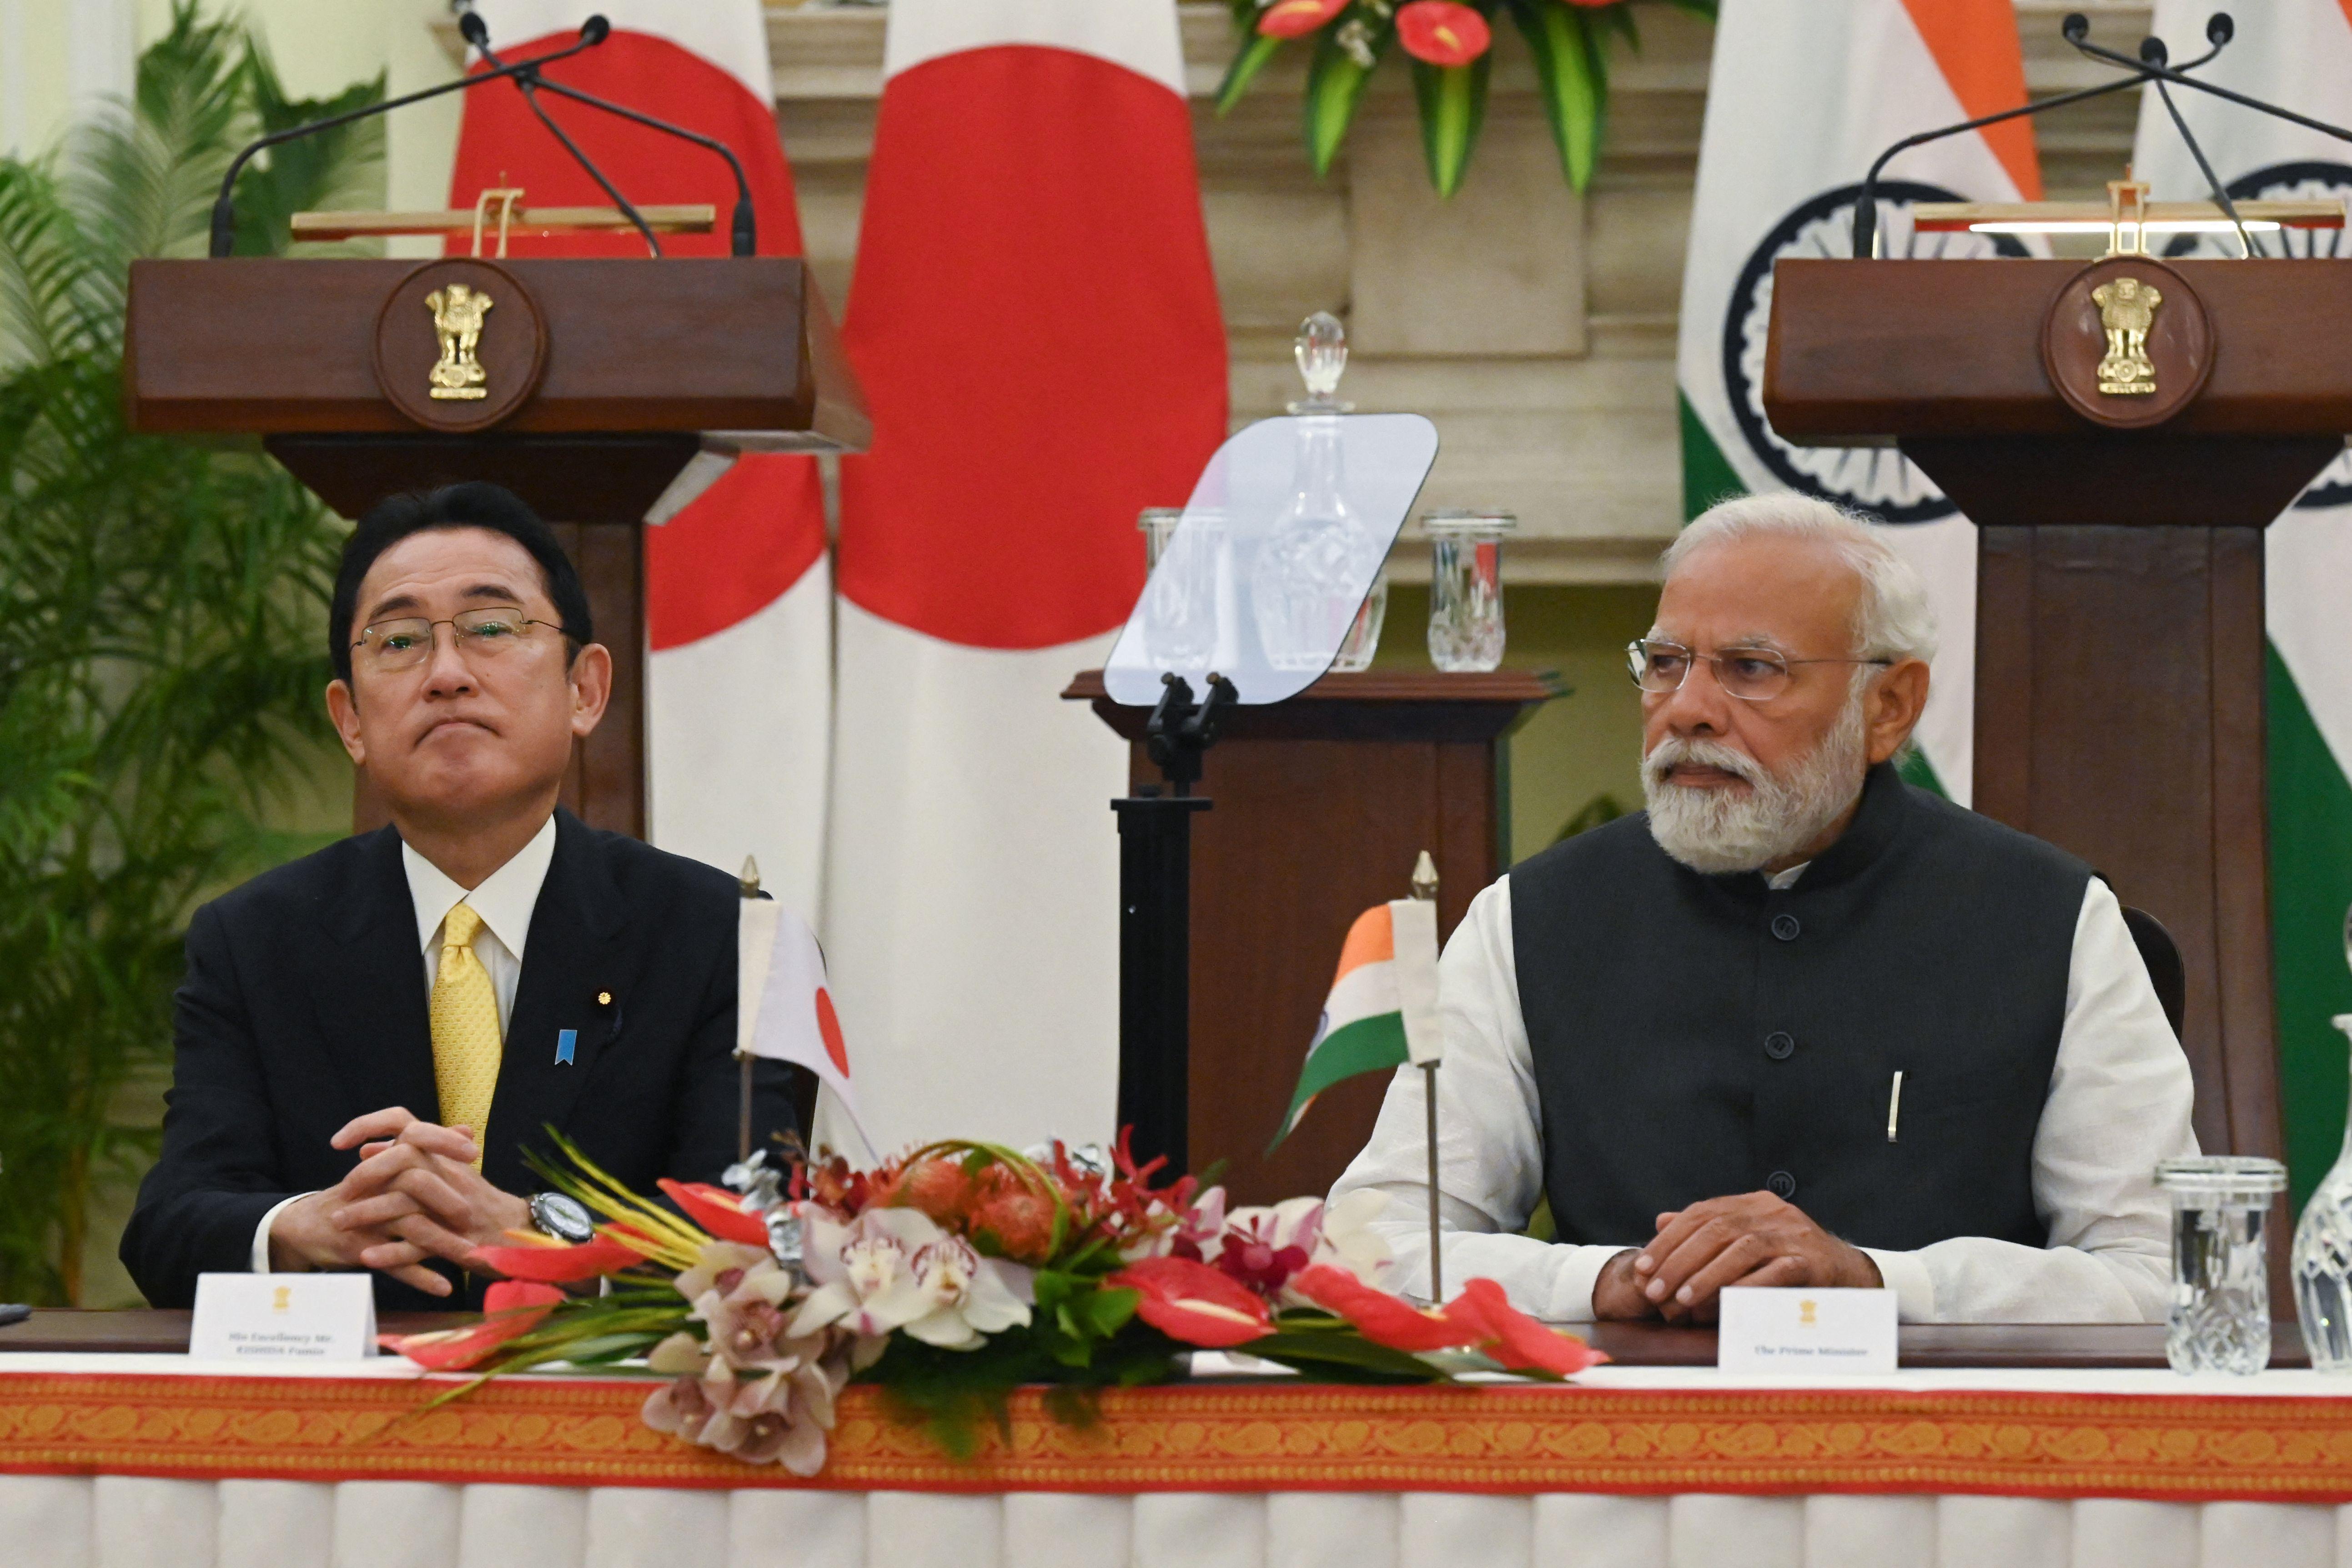 Kishida and Modi sit at a table with flowers and little flags of Japan and India in front of them.